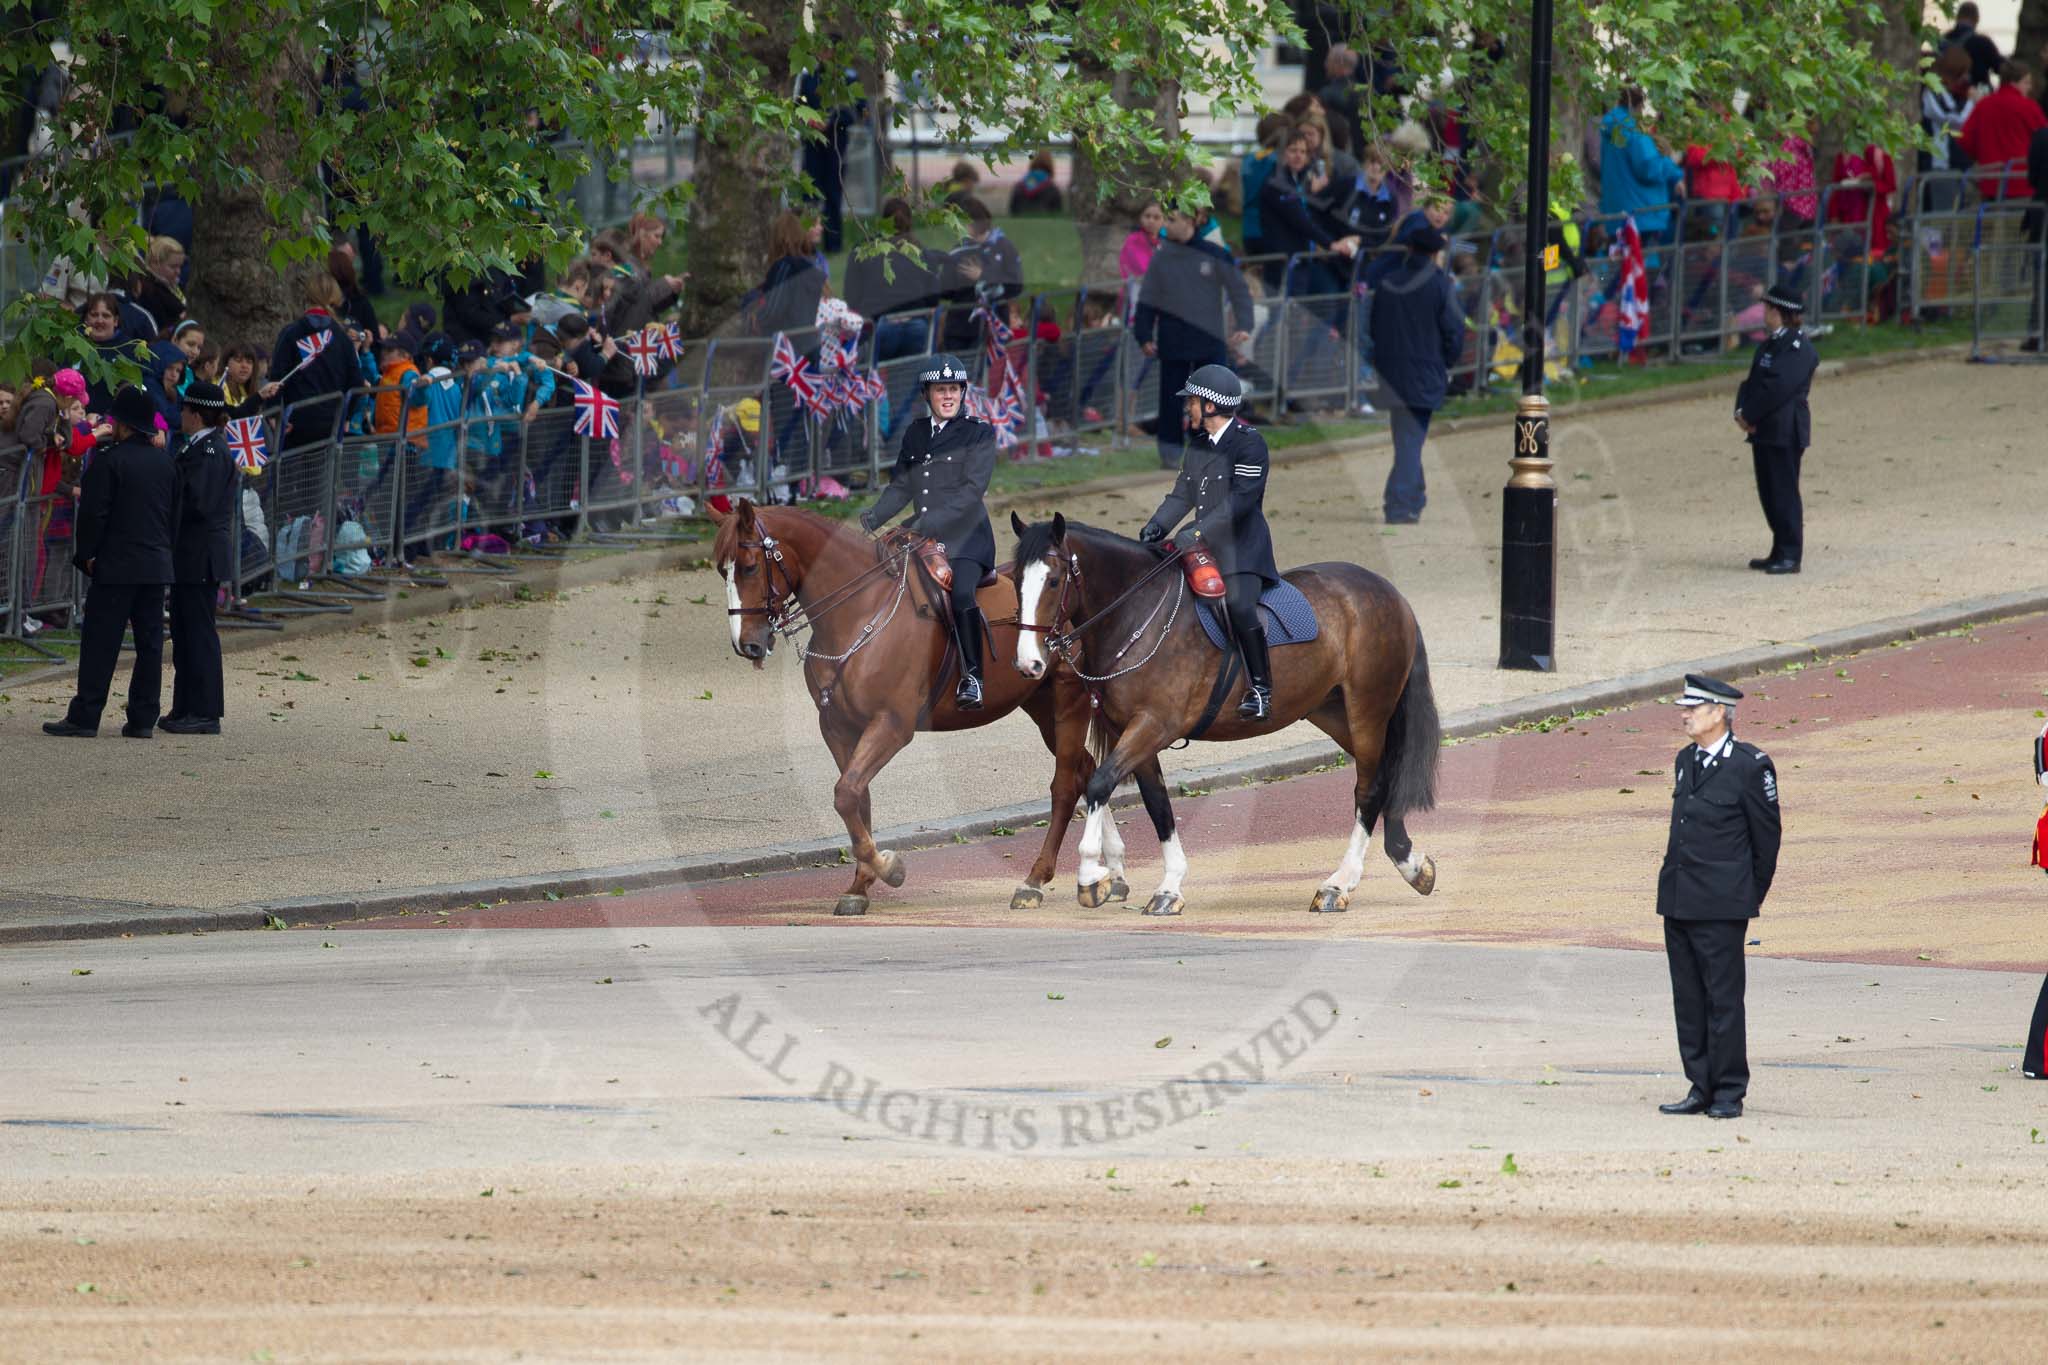 The Colonel's Review 2012: Metropolitan Police officers on the St James's Park side of Horse Guards Parade.
Horse Guards Parade, Westminster,
London SW1,

United Kingdom,
on 09 June 2012 at 09:46, image #8